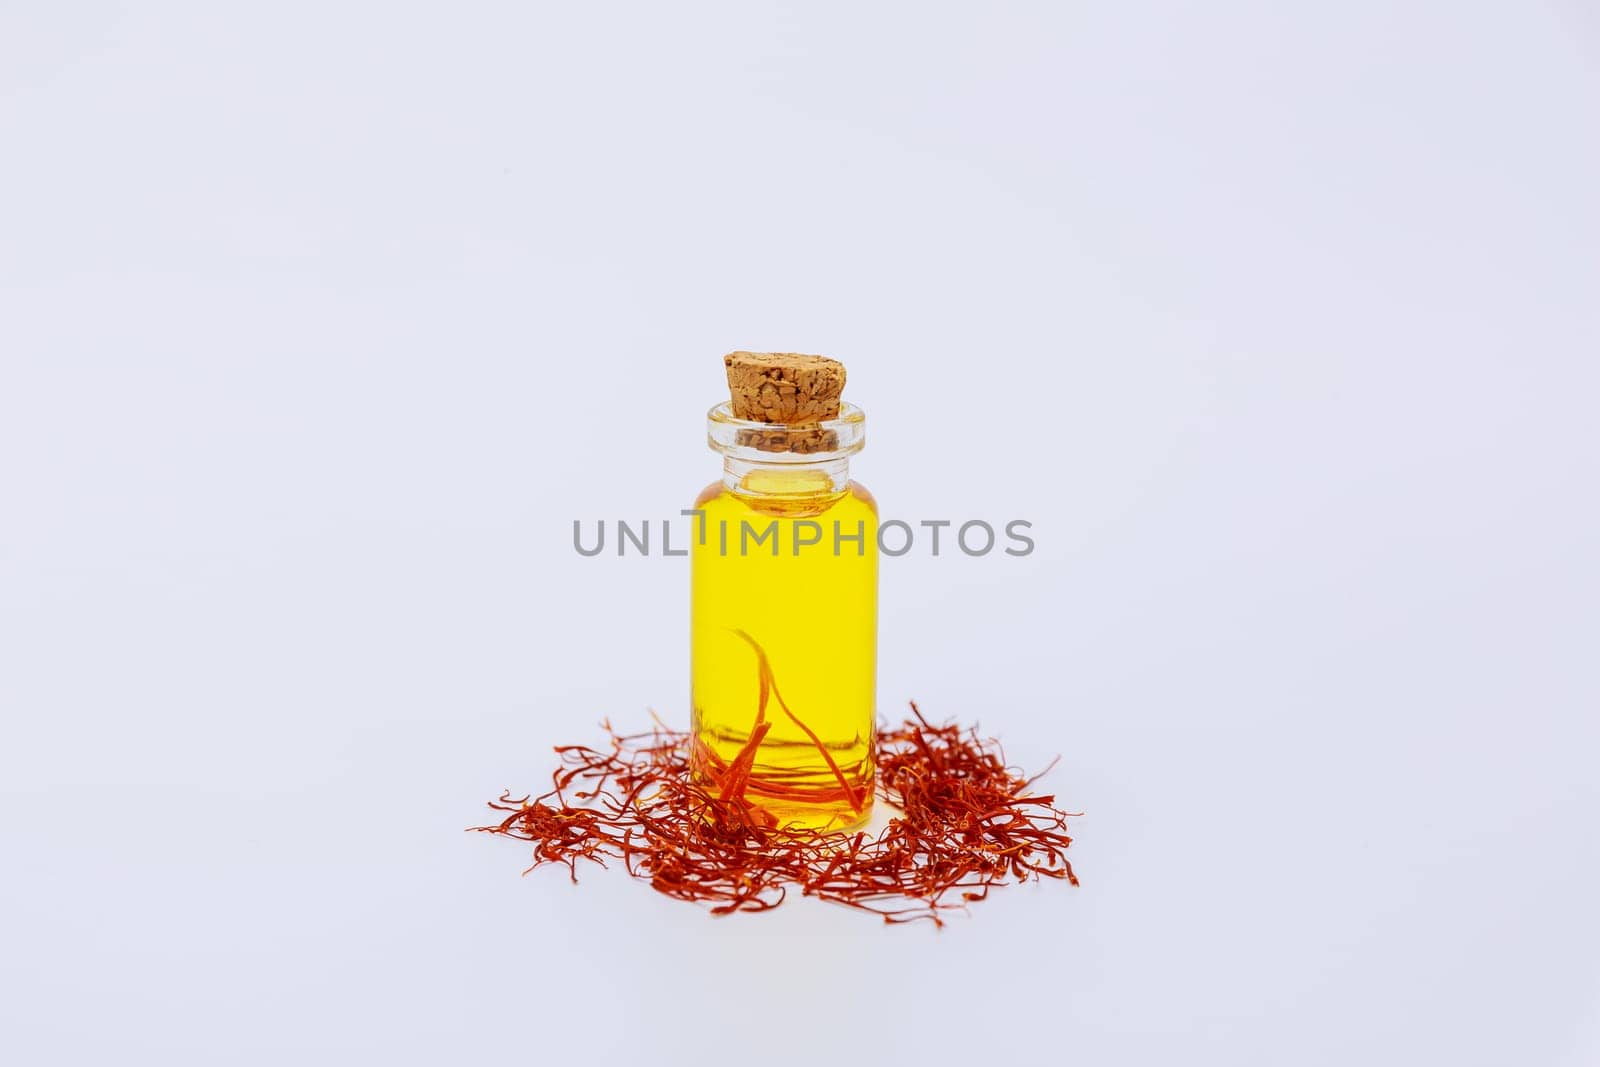 Oil extract from saffron stamens on a white background. Dry threads of saffron.